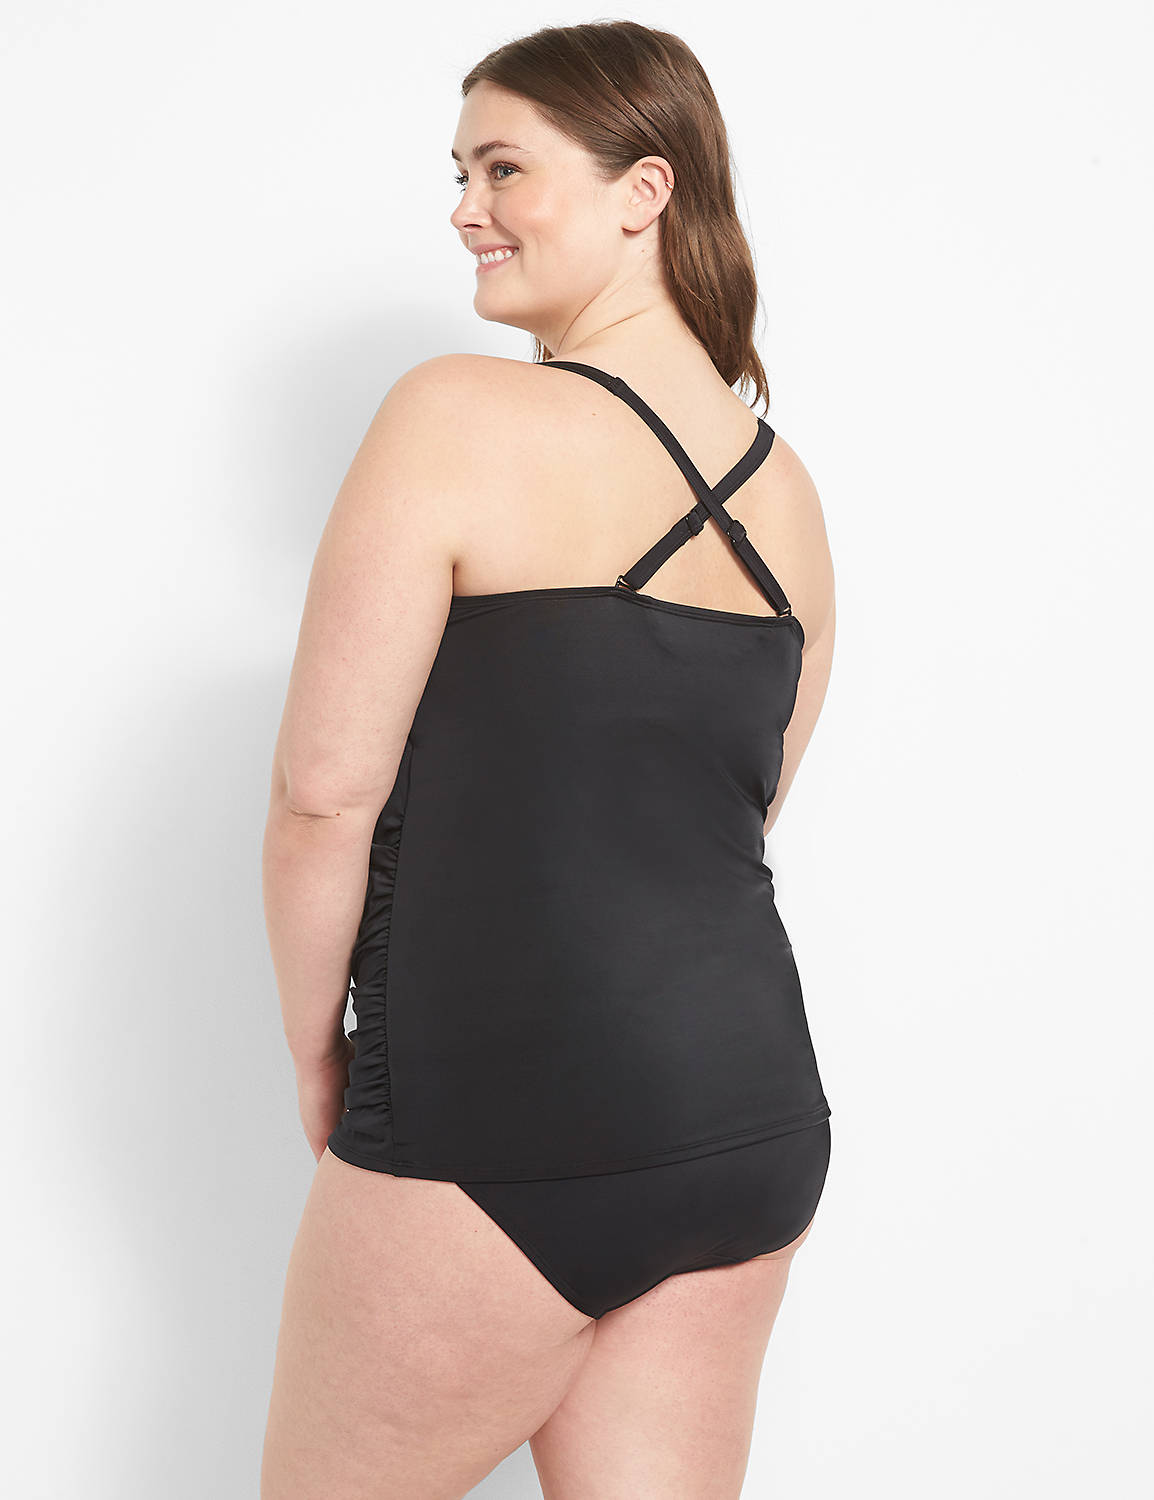 UW Fitted Tankini 1117753 Product Image 5